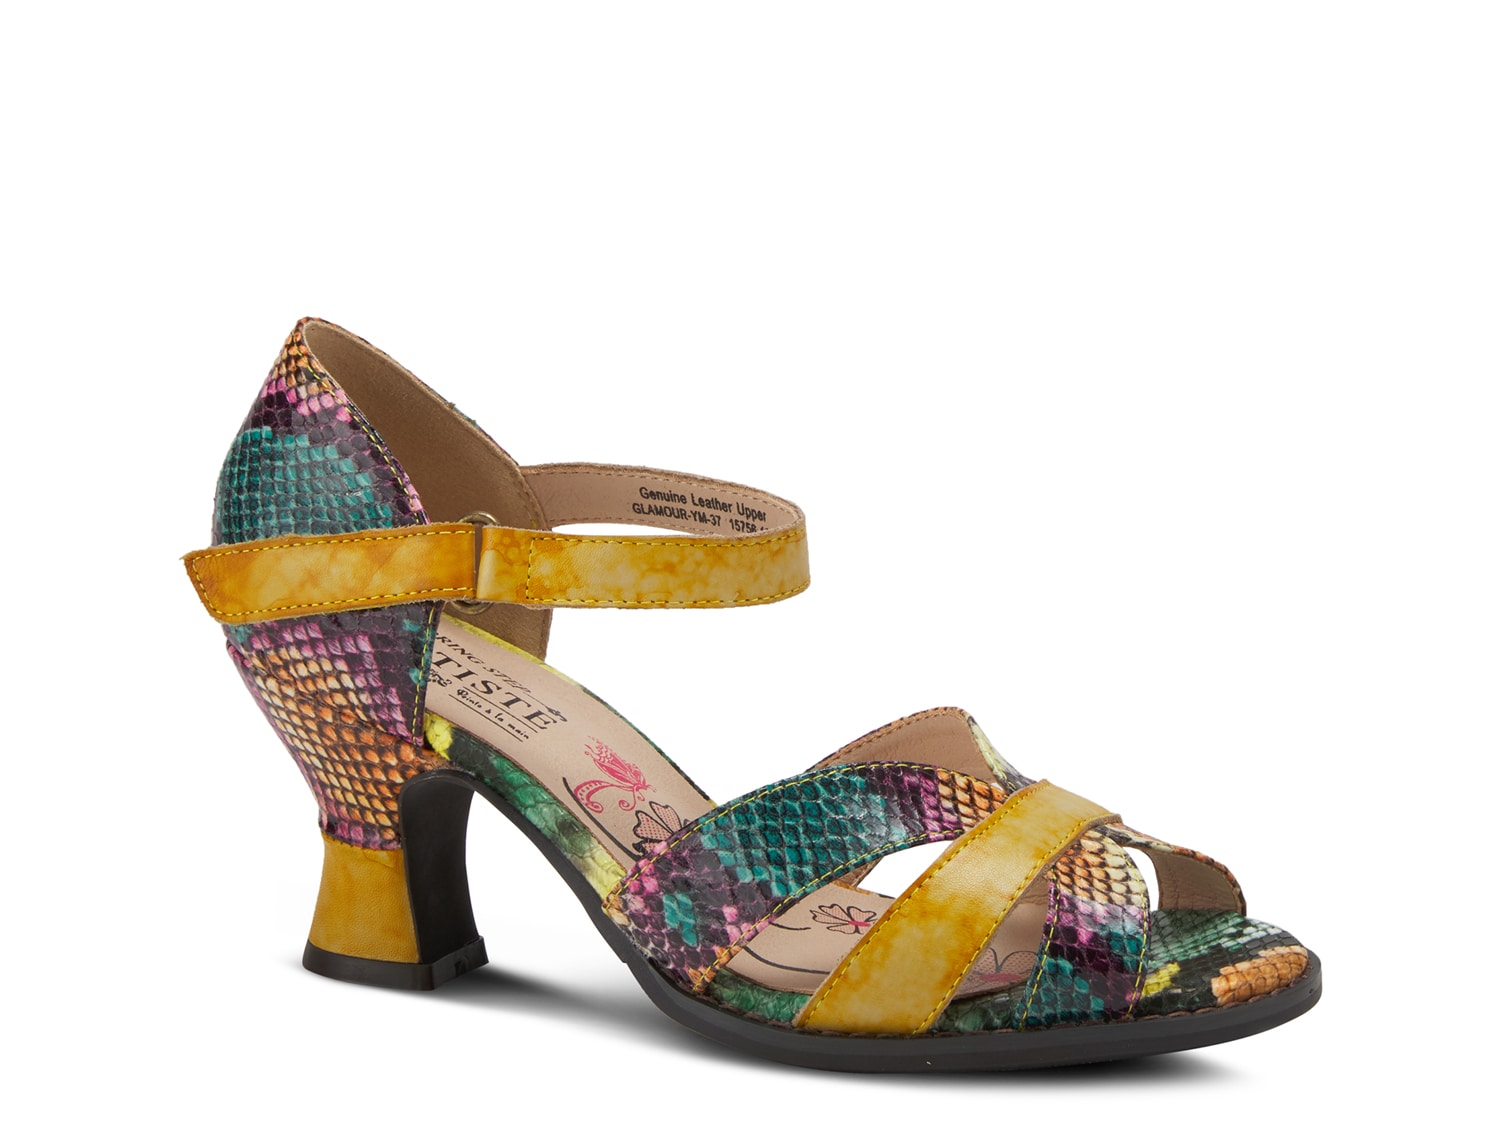 spring step shoes dsw